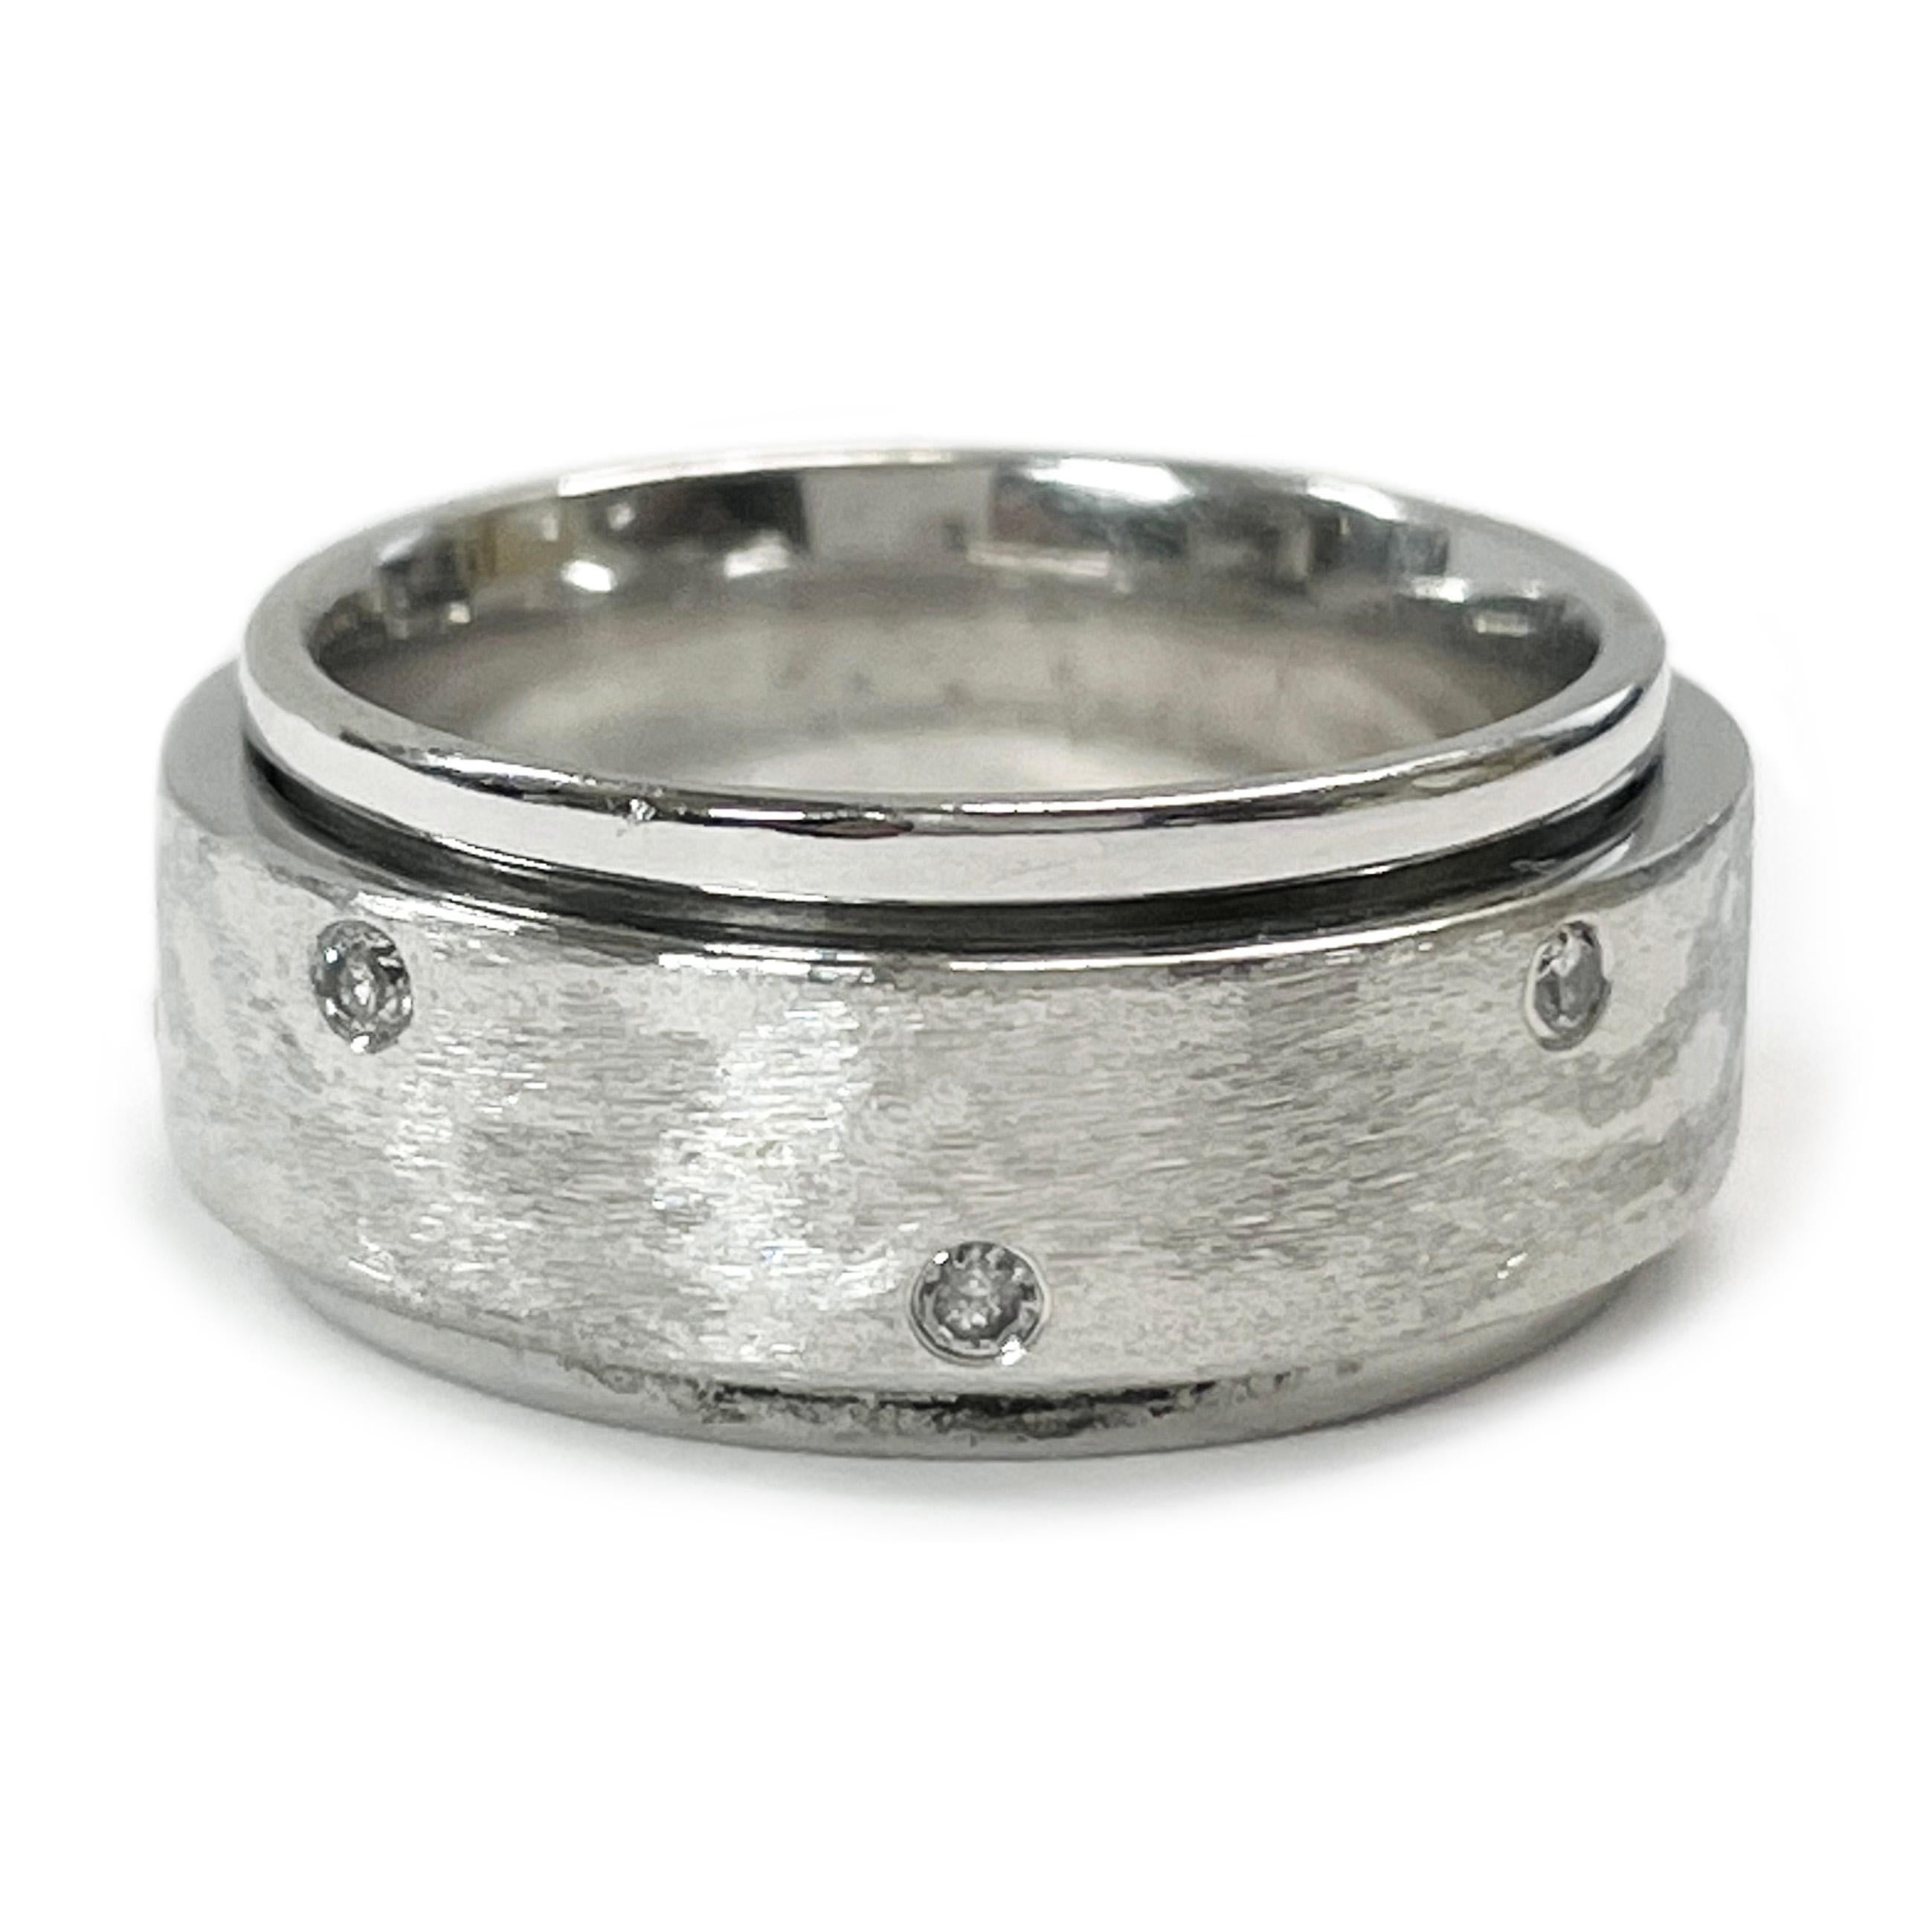 18 Karat White Gold Diamond Spinner Ring. The ring features a white gold wide band with a smooth shiny finish and a thinner spinner band with flush-set diamonds. There are a total of eight round diamonds set in a brushed finished band that spins.